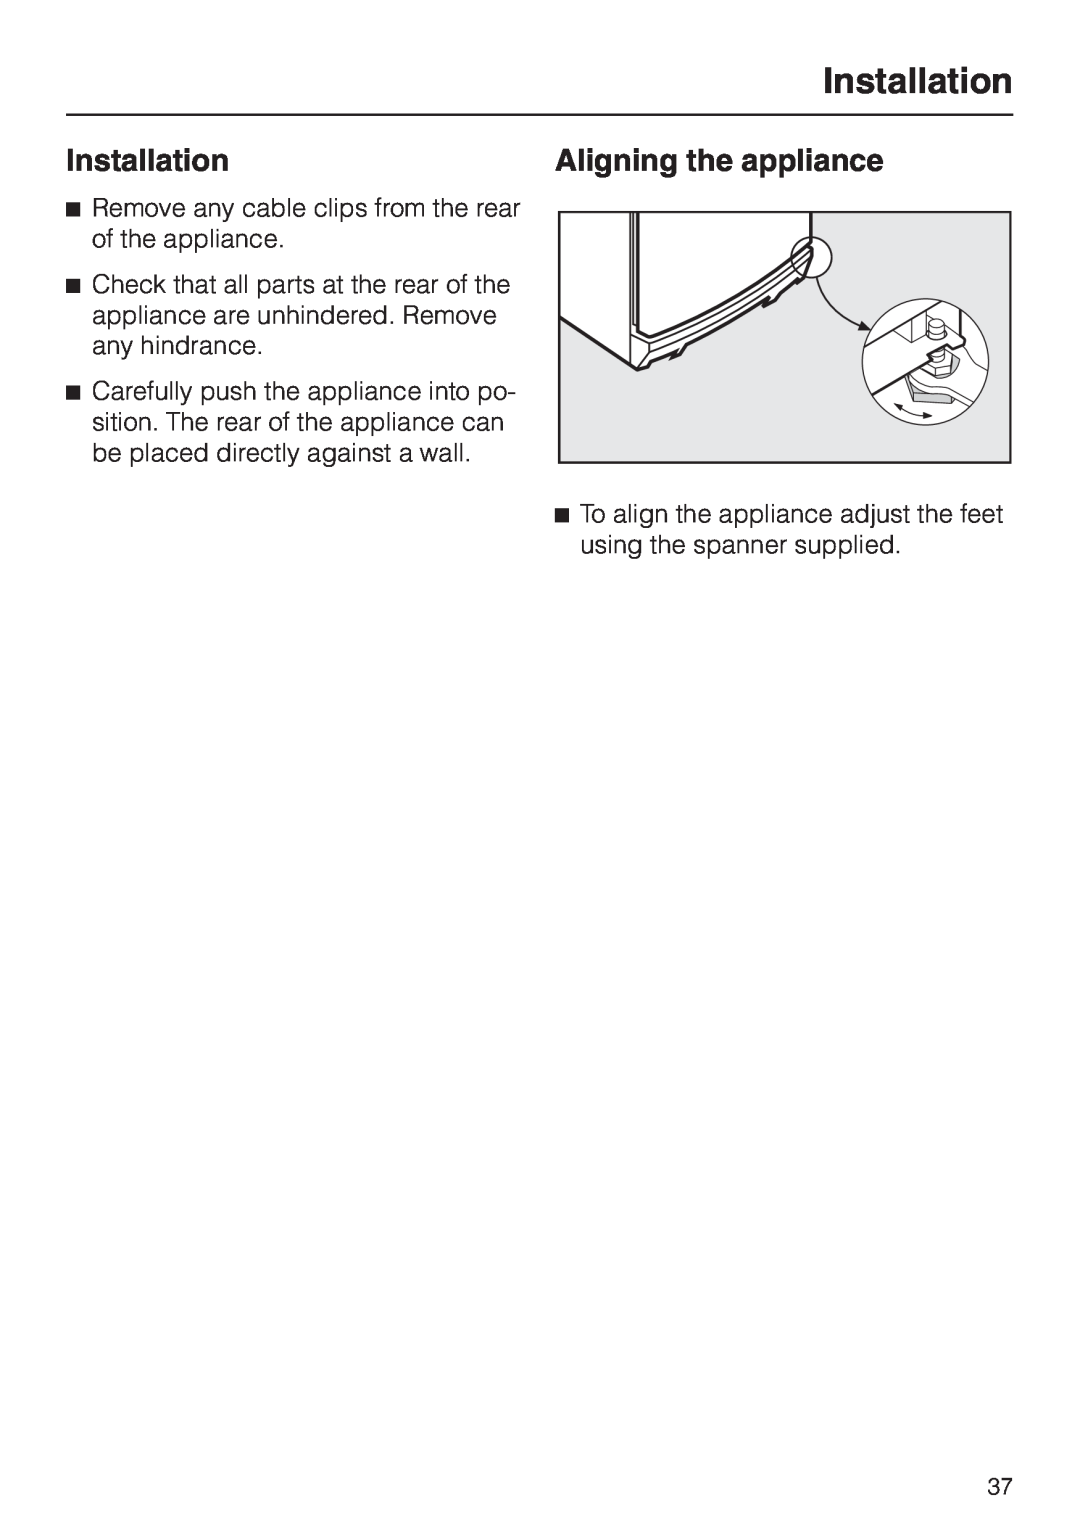 Miele KF 7544 installation instructions Installation, Aligning the appliance 